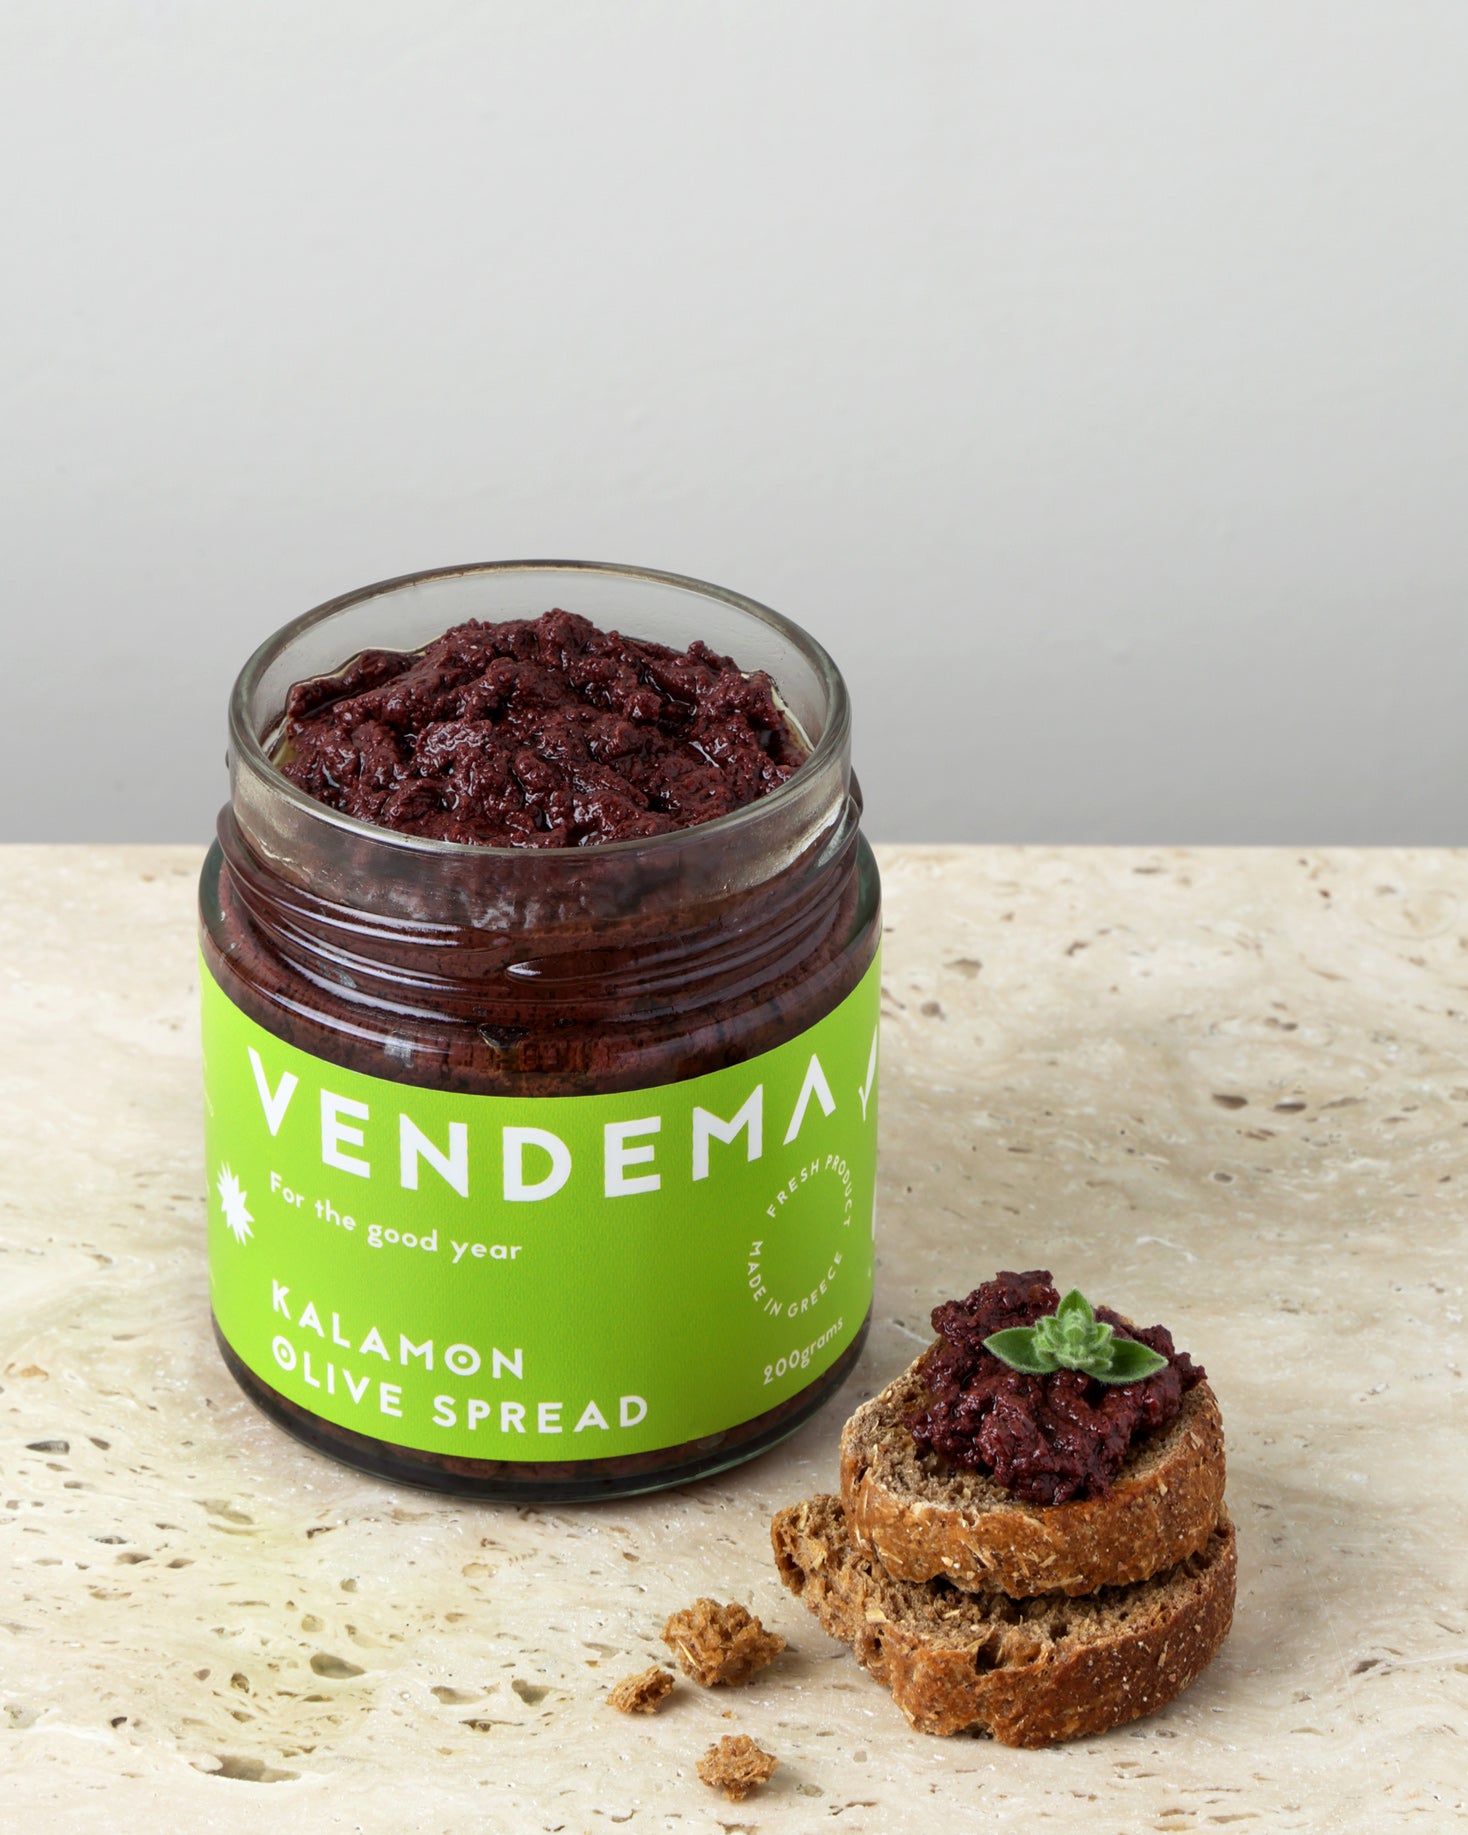 Open Vase of Vendema Kalamon Olive Spread with Complimentary Rusks.